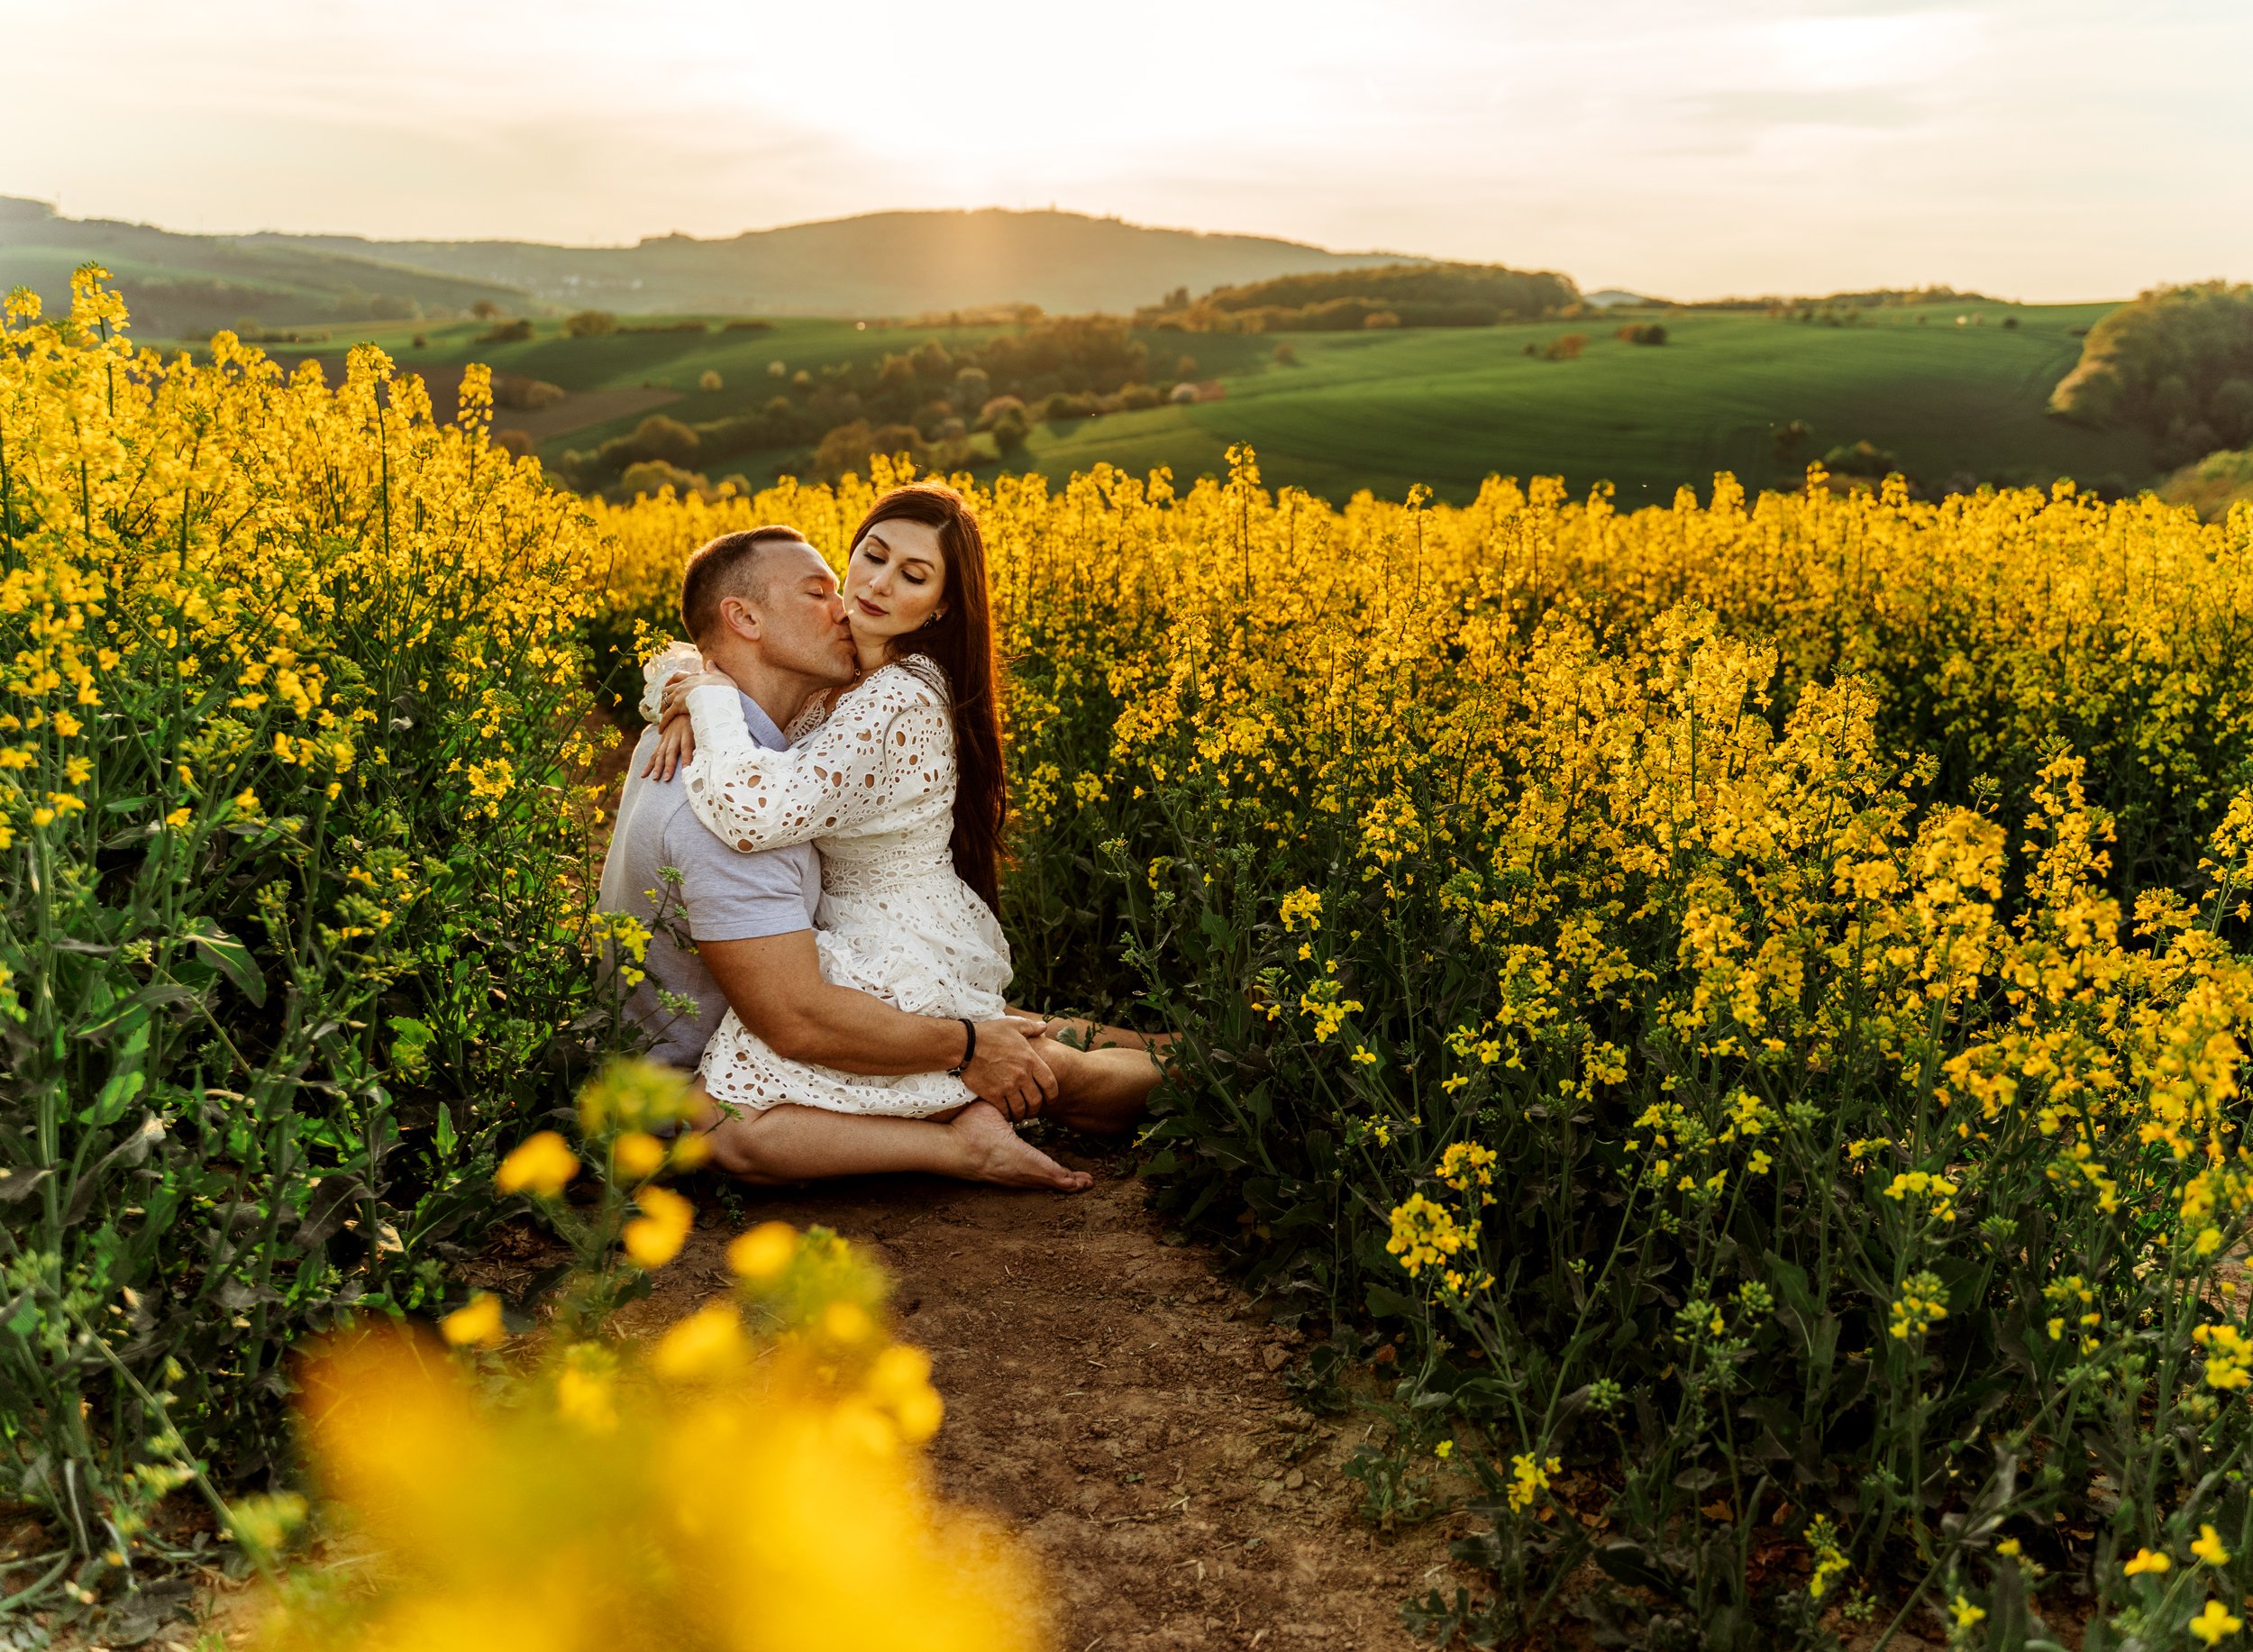 emotive-engagement-photo-session-in-yellow-flower-fields-in-ramstein-germany-by-sarah-havens (8).jpg